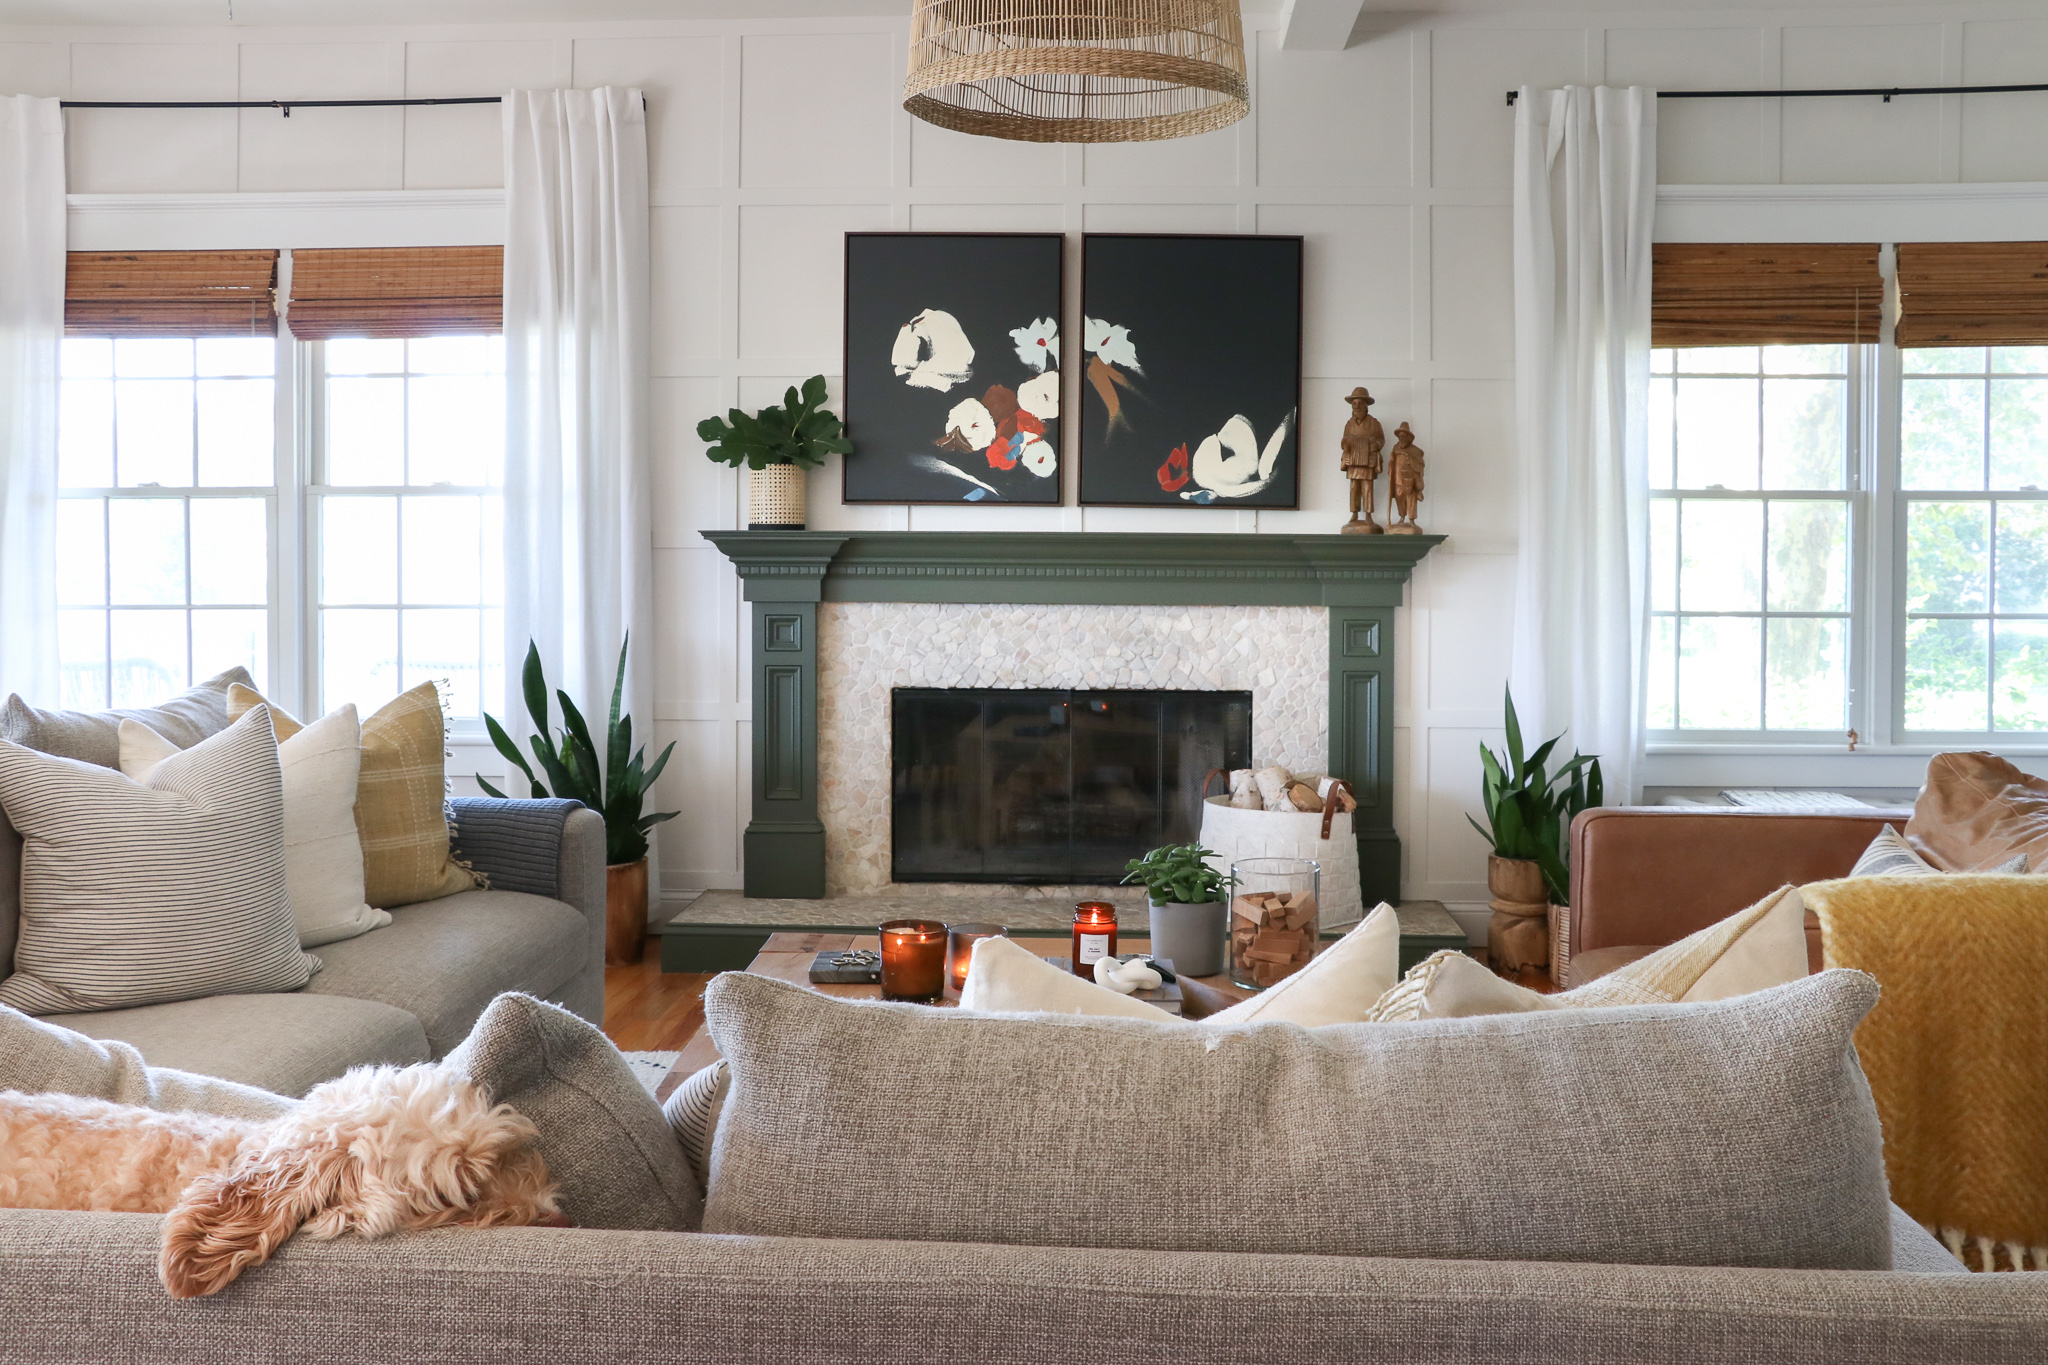 Family Room Reveal-Bridgerton Meets the Long Island Coast. Rug Malta/Natural by Annie Selke. Antionette drapes and pillows by Annie Selke. Paint is Desert Twilight and Calm Benjamin Moore.